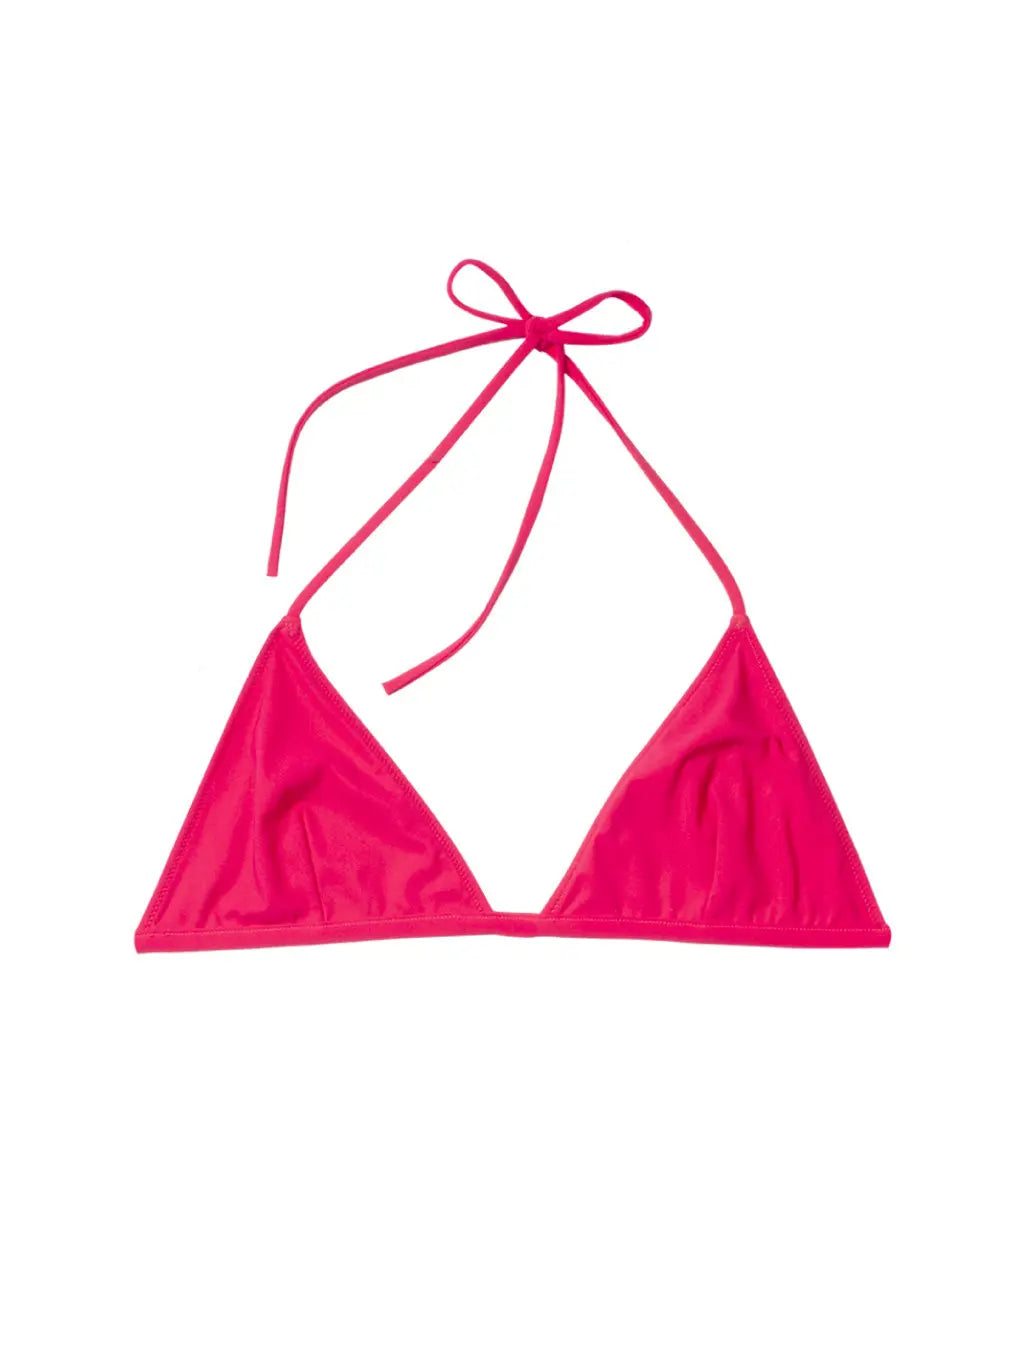 A vibrant pink triangle bikini top with neck and back ties is displayed against a plain white background. Available at Bassalstore in Barcelona, the Lido Trentotto Magenta Bikini Top has a simple, classic design with tie strings for an adjustable fit.